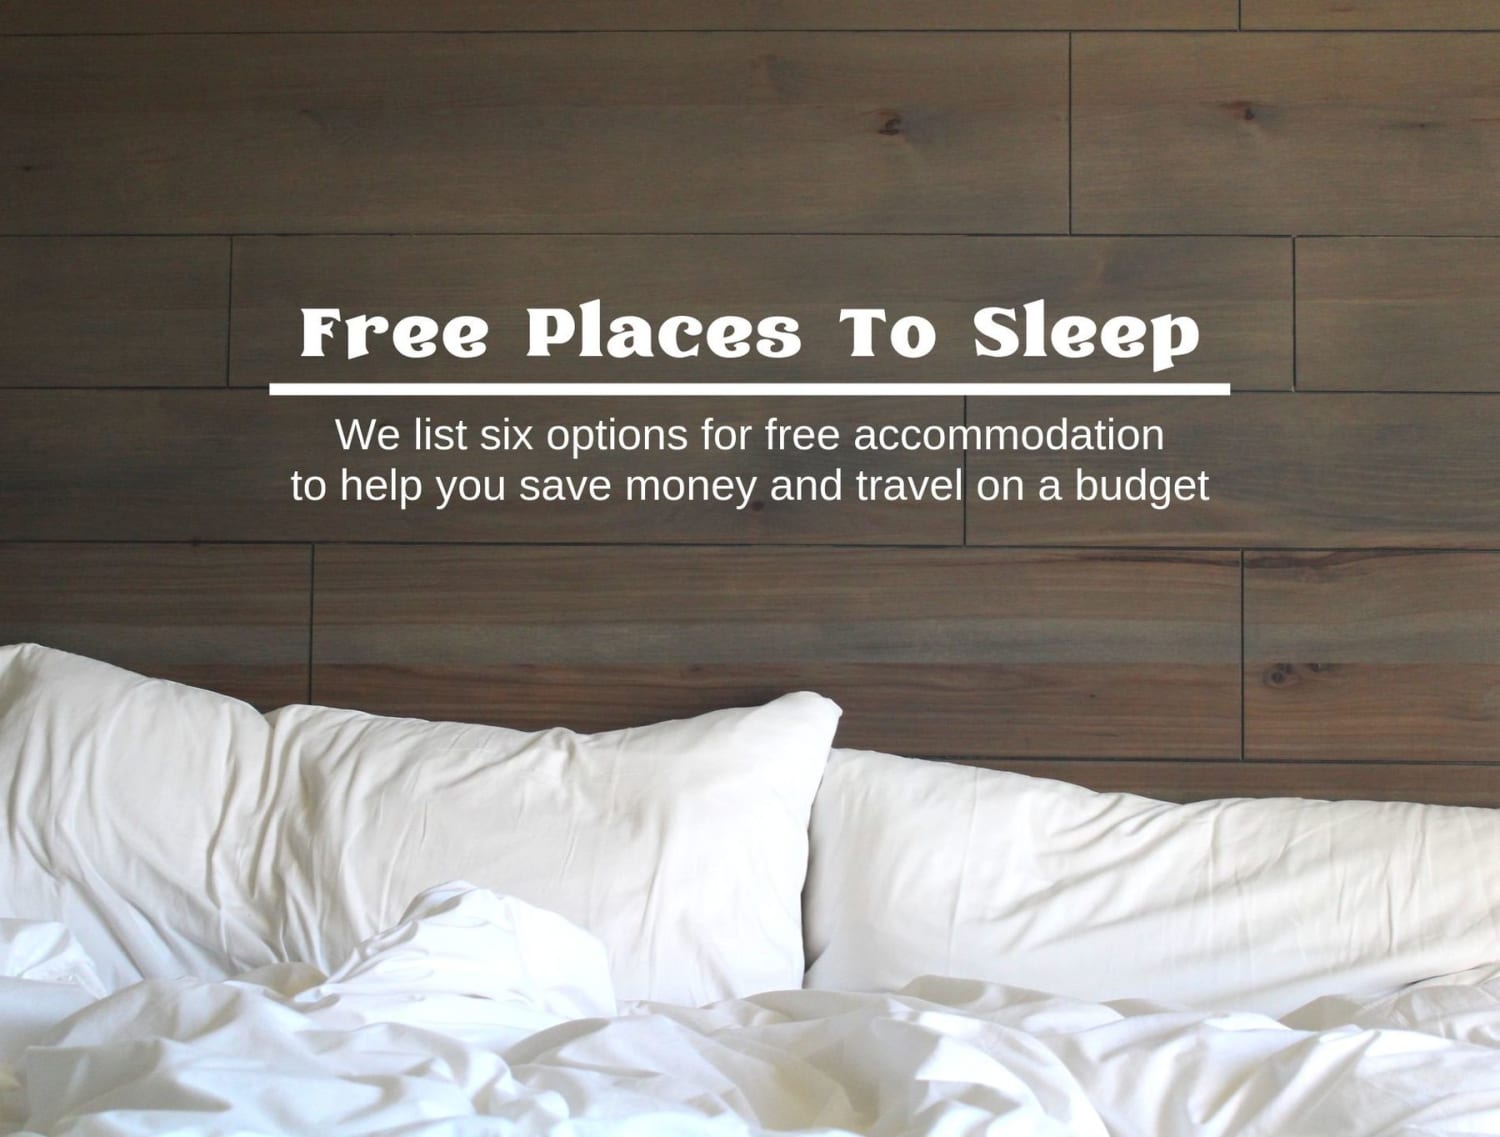 Free Places To Sleep: Travel With Free Accommodation